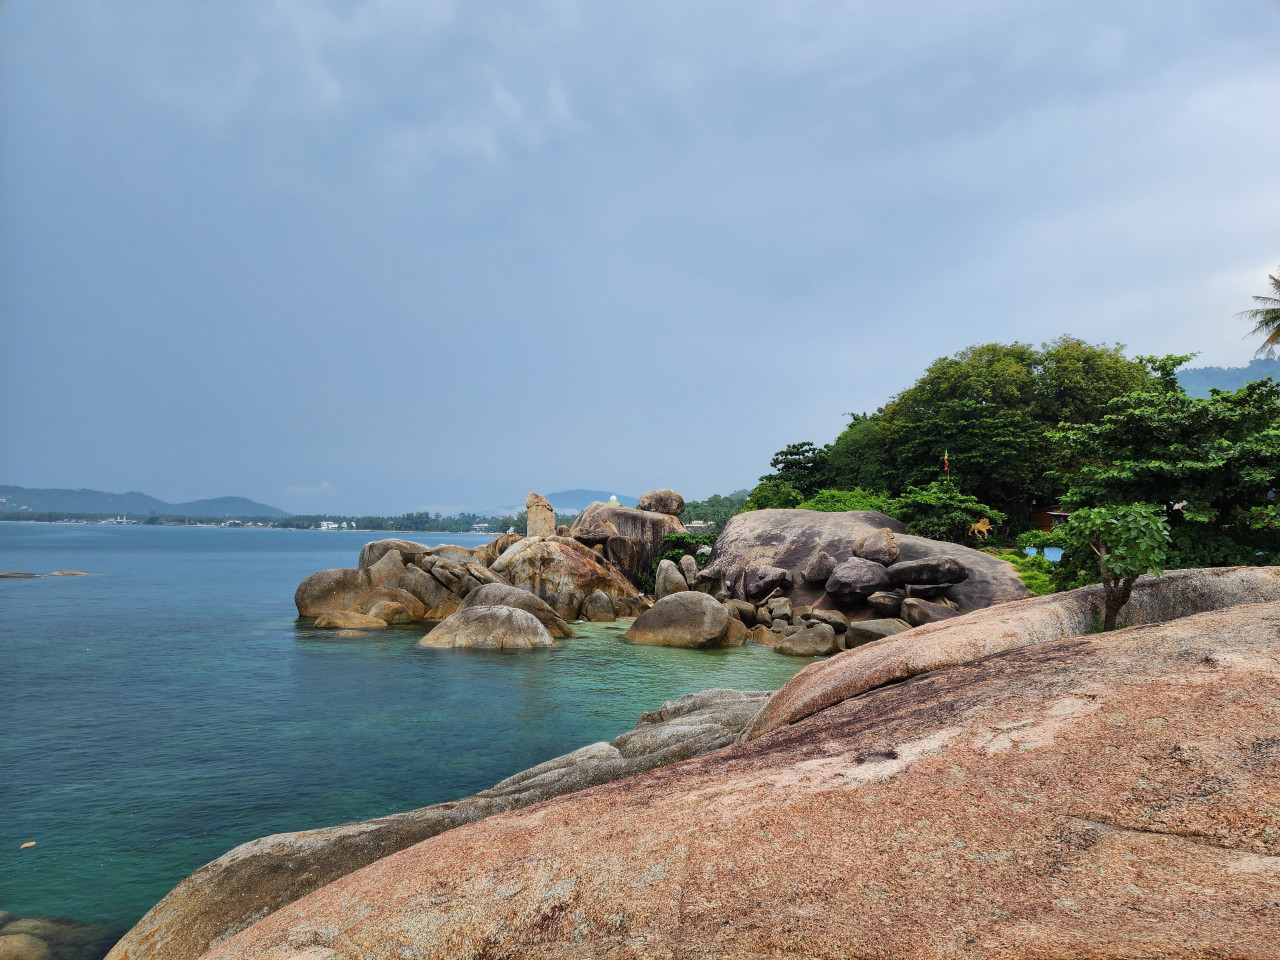 The rock formations of Hin Ta Hin Yai are a popular place for picture taking. – Pic by Shah Shamshiri